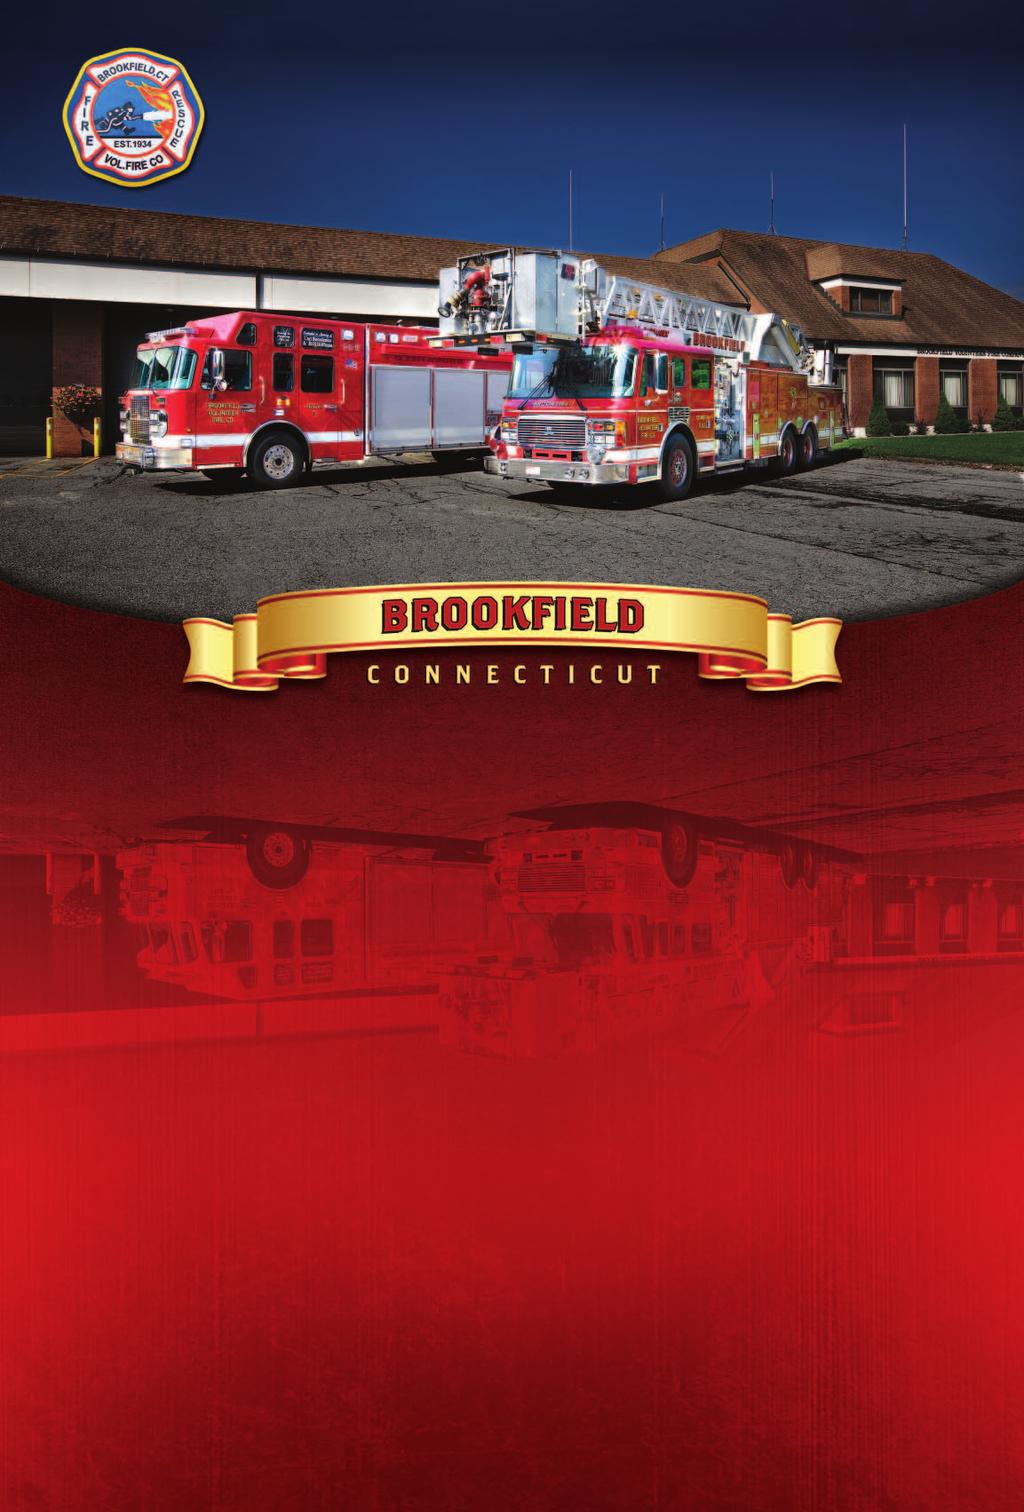 Brookfield Volunteer Fire Company Proudly Serving the Brookfield Community Since 1934 FEBRUARY 1 2 3 4 5 6 7 Full Moon 8 9 10 11 12 Lincoln s Birthday 13 14 Valentine s Day Last Quarter Moon 15 16 17